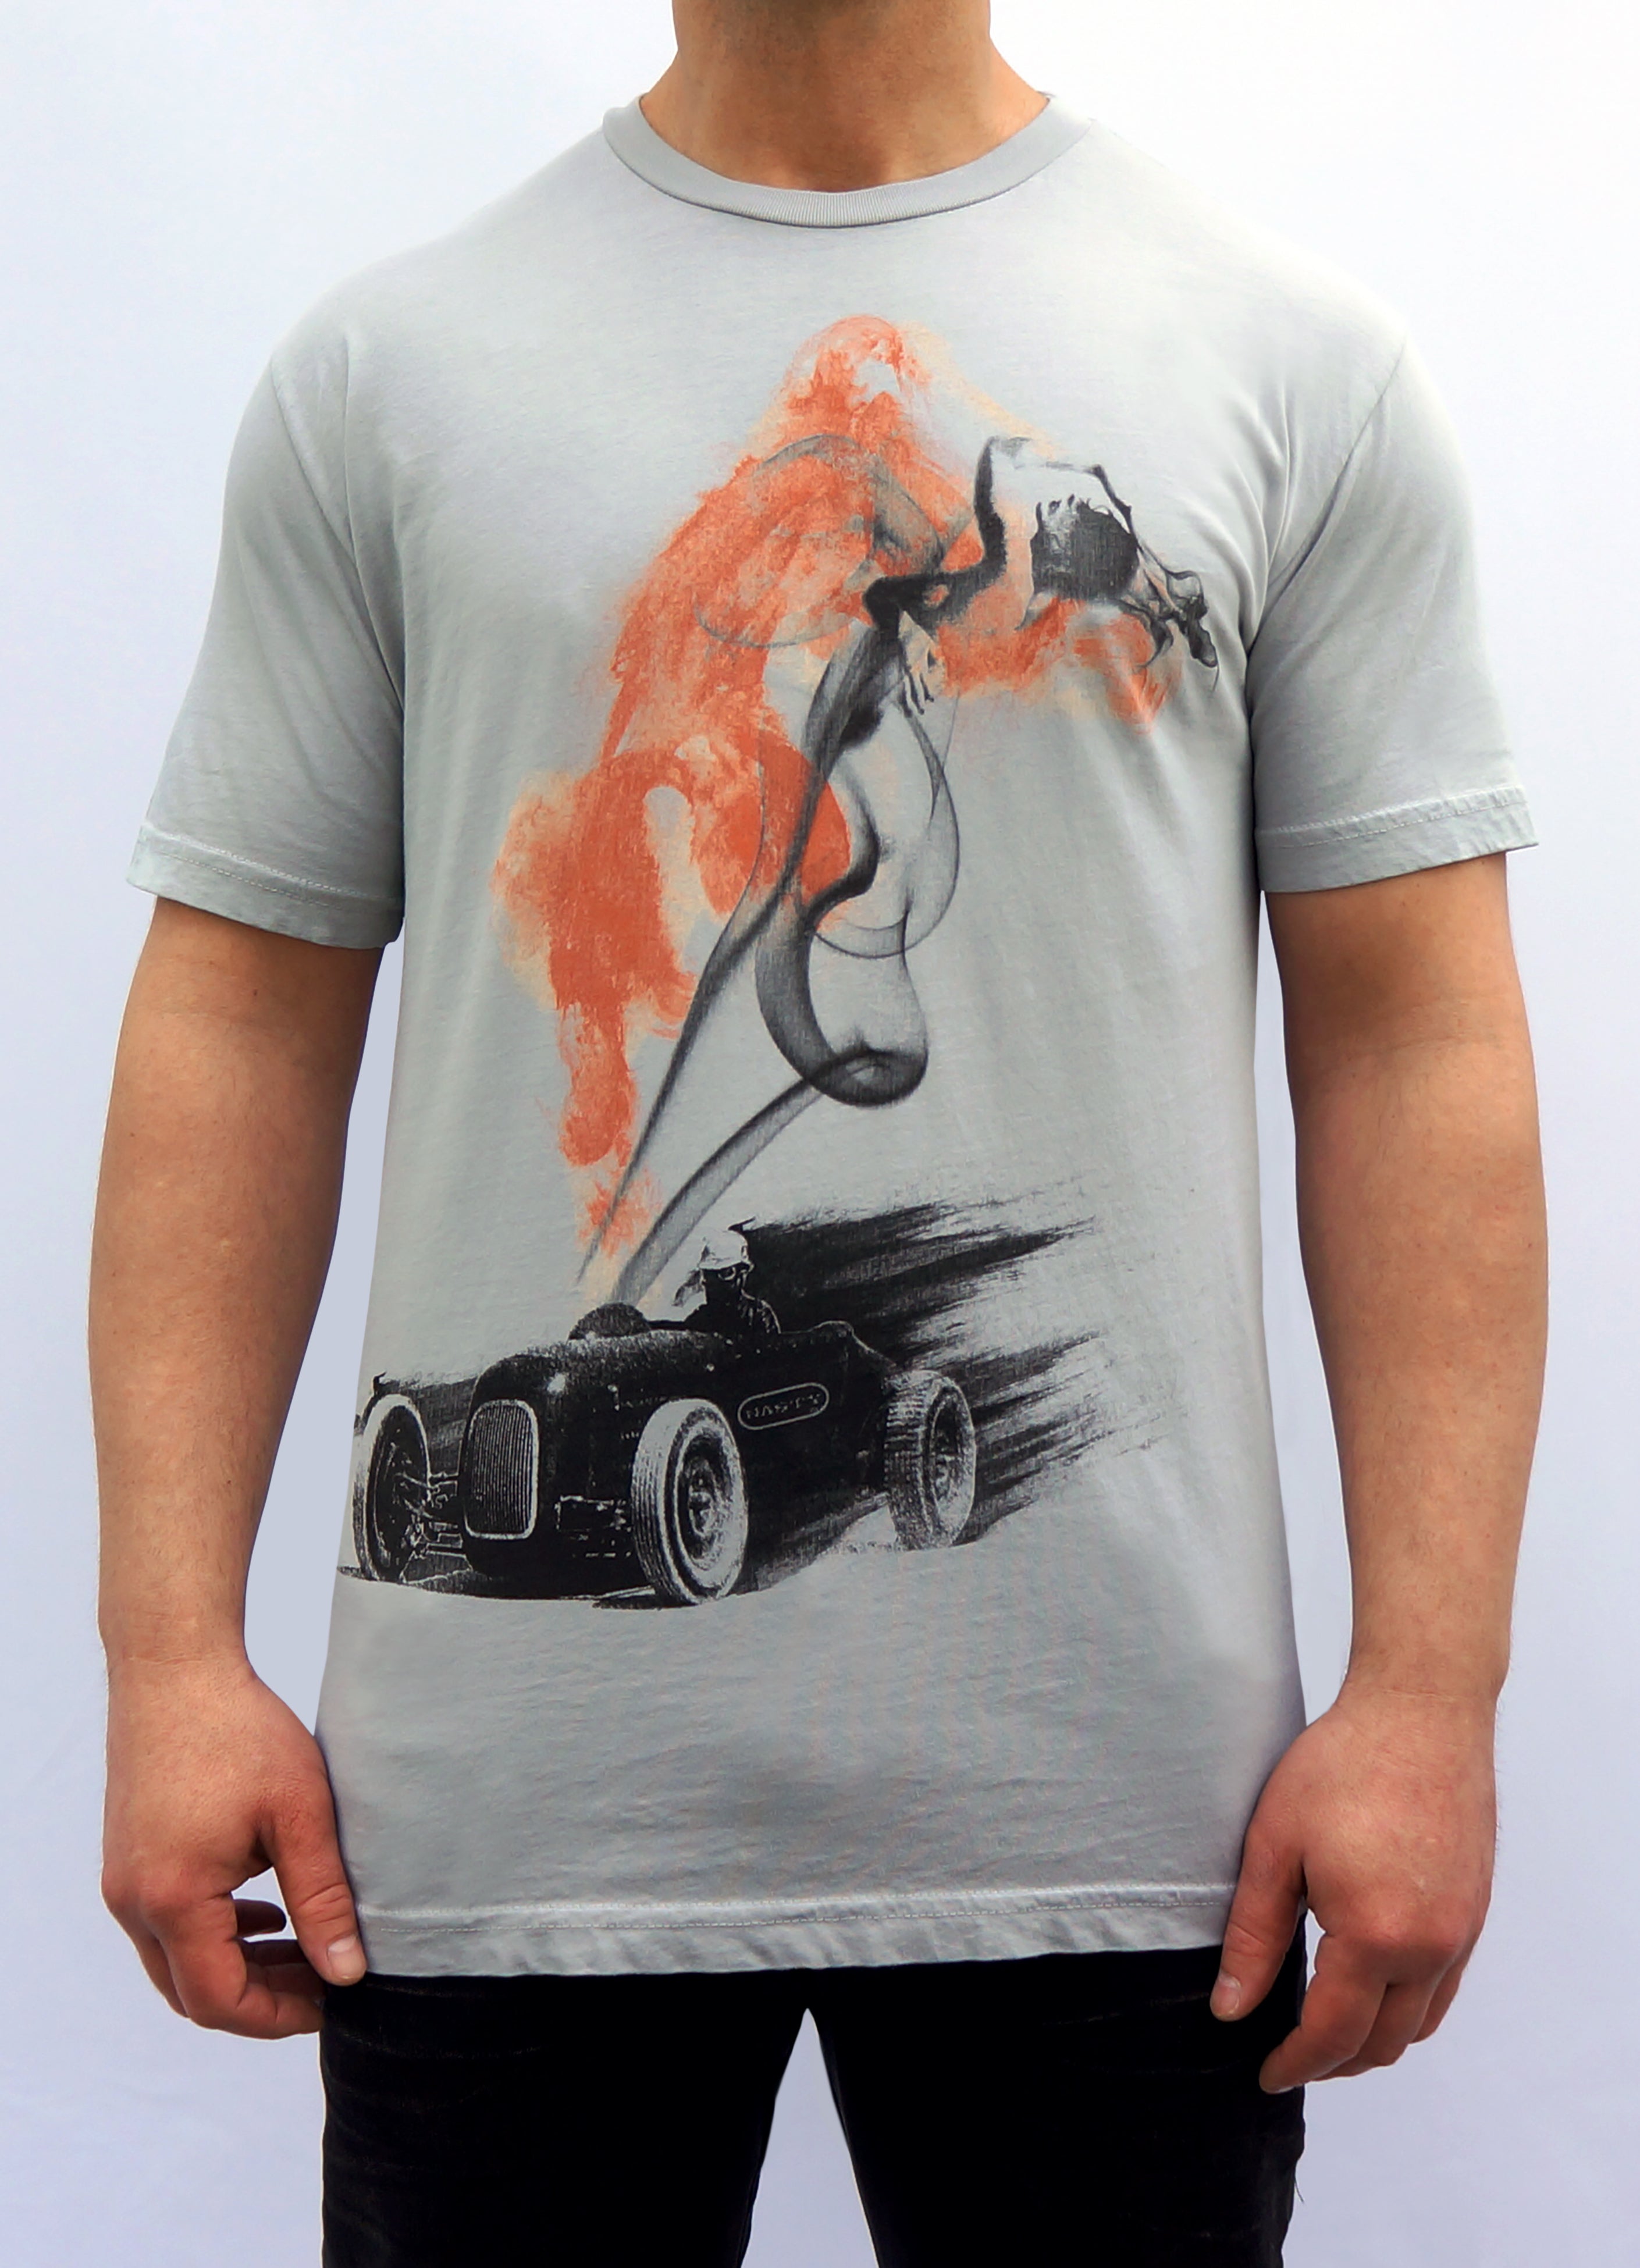 Nasty kustom crafted clothing custom hot rod car moto race sports cool vintage sport drifting drifter nitro slingshot racing drag dragster motorcycle tee graphic